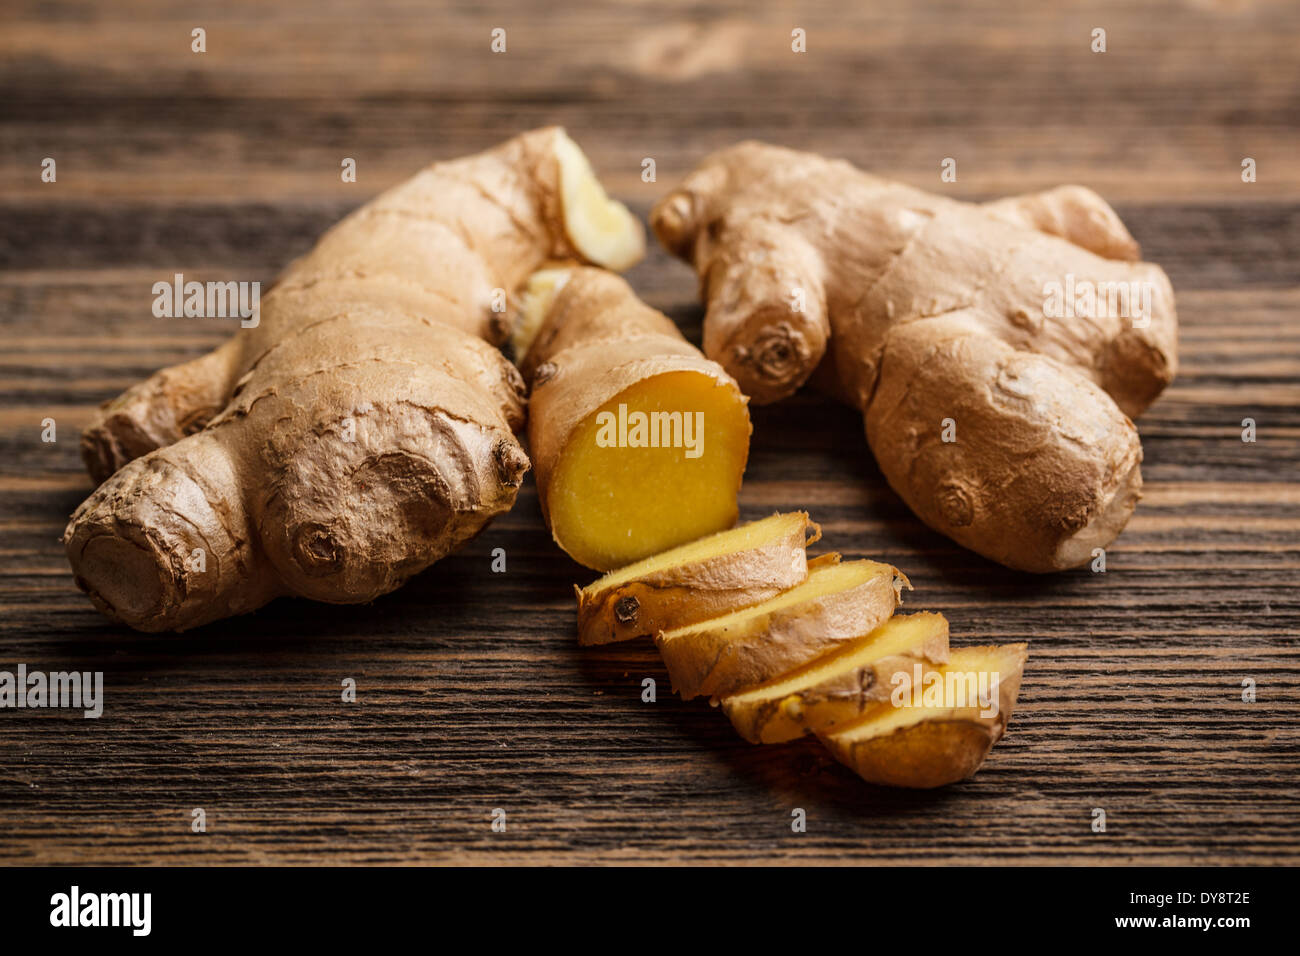 Fresh ginger, whole and sliced on rustic wooden background Stock Photo